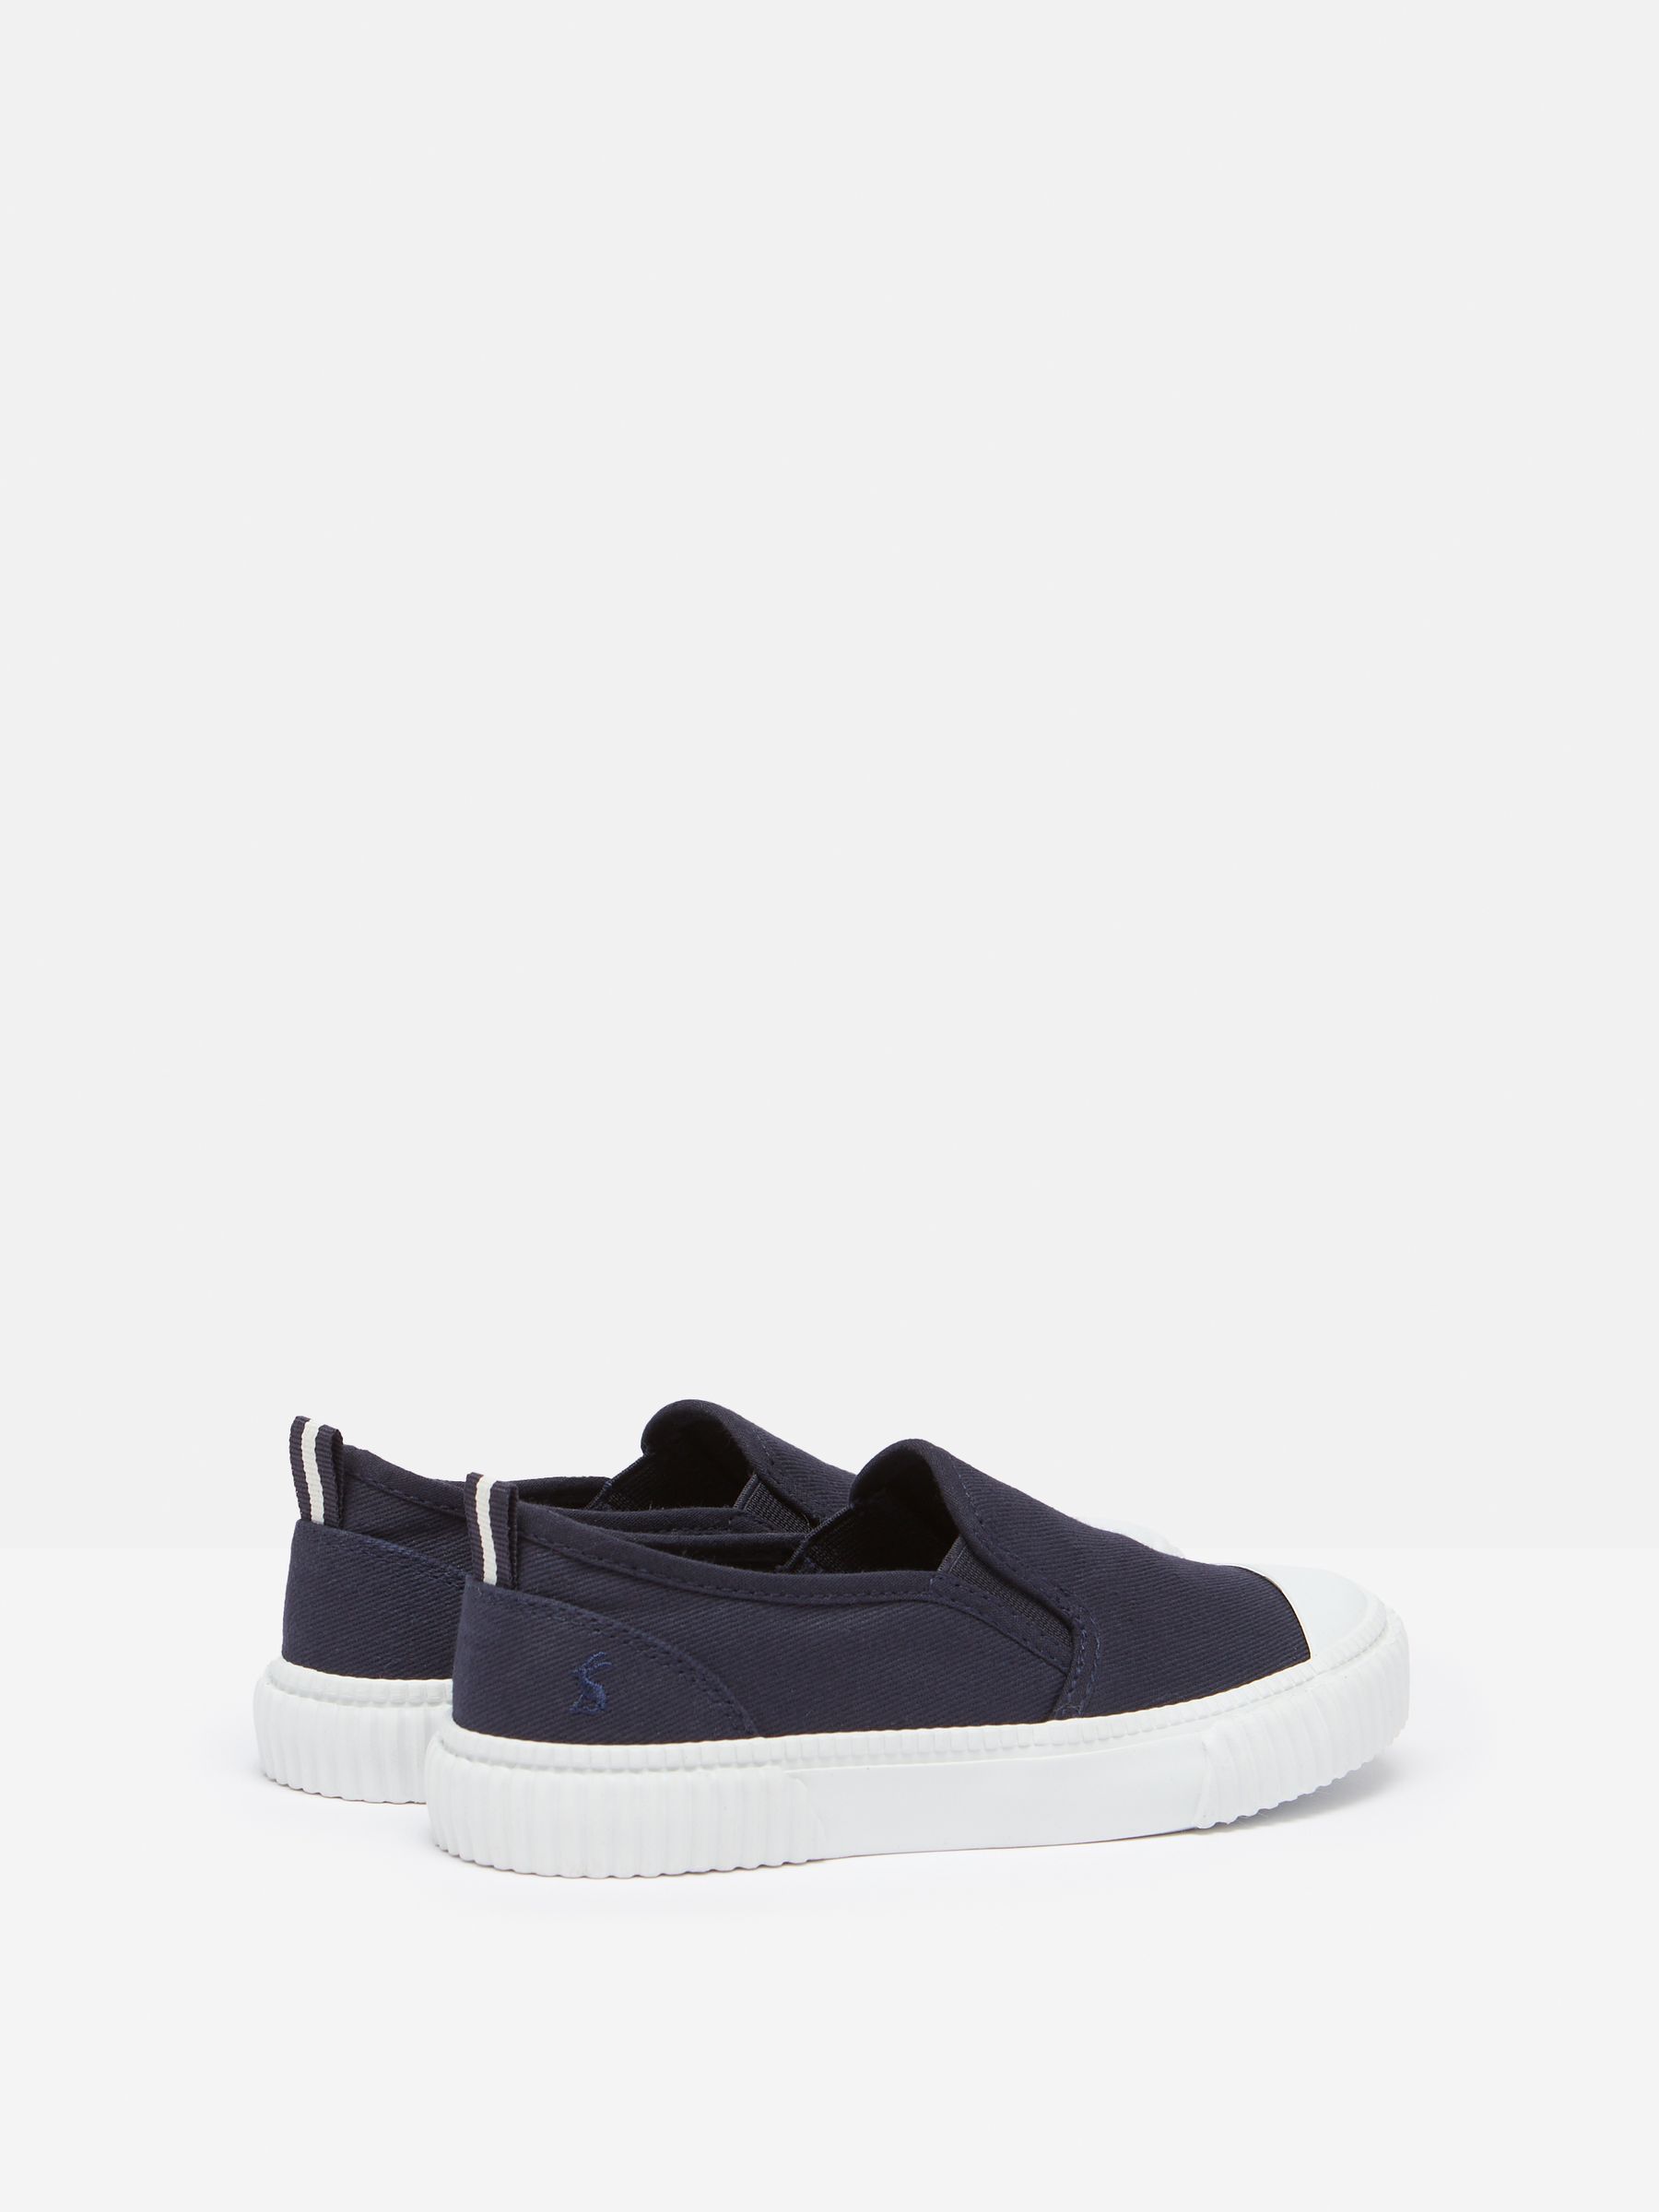 Buy Joules Peasy Slip On Trainers from the Joules online shop